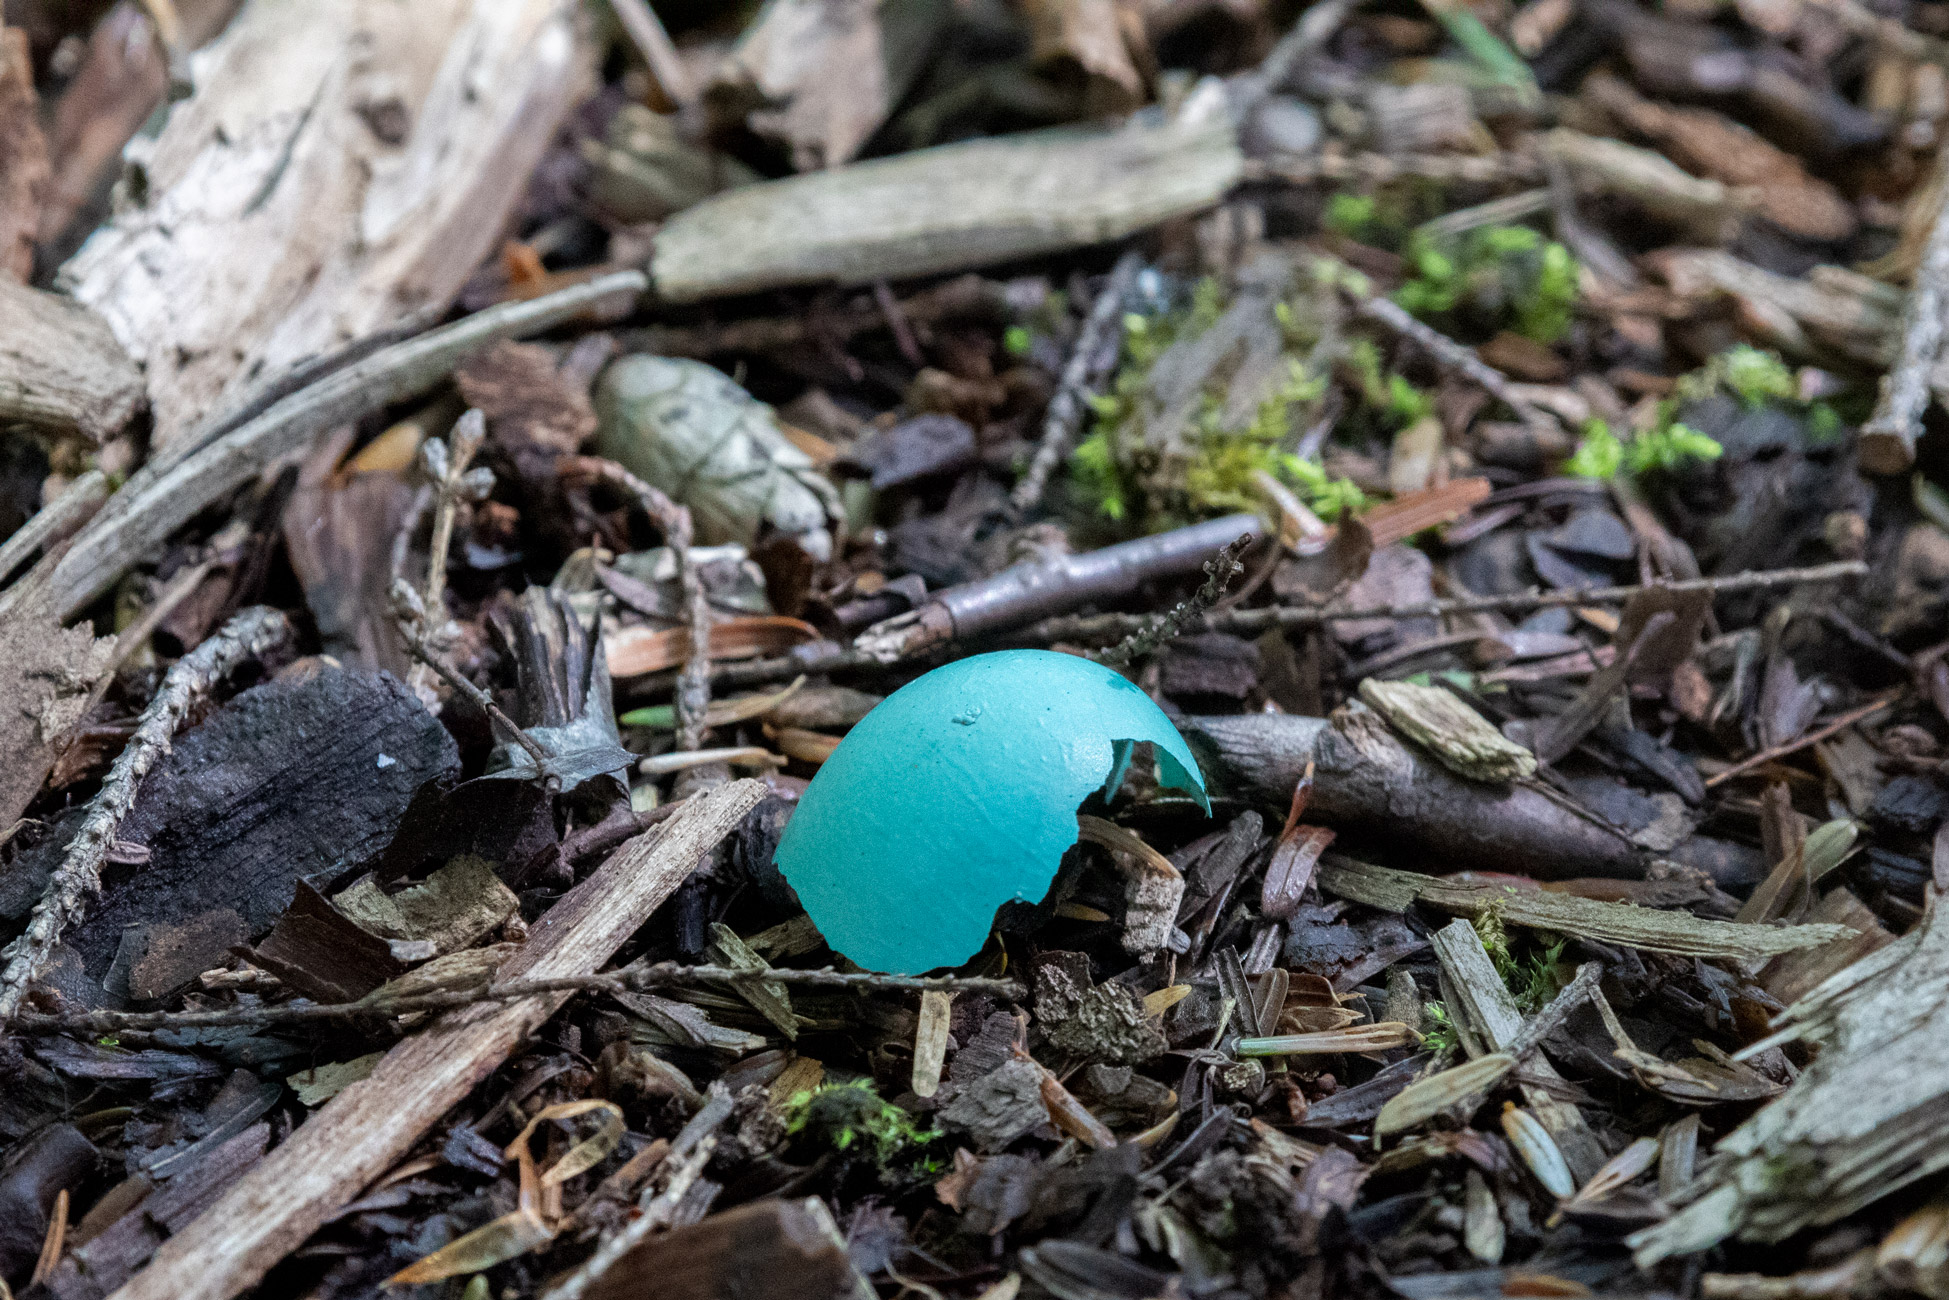 Part of a small blue egg shell sitting on a forest floor